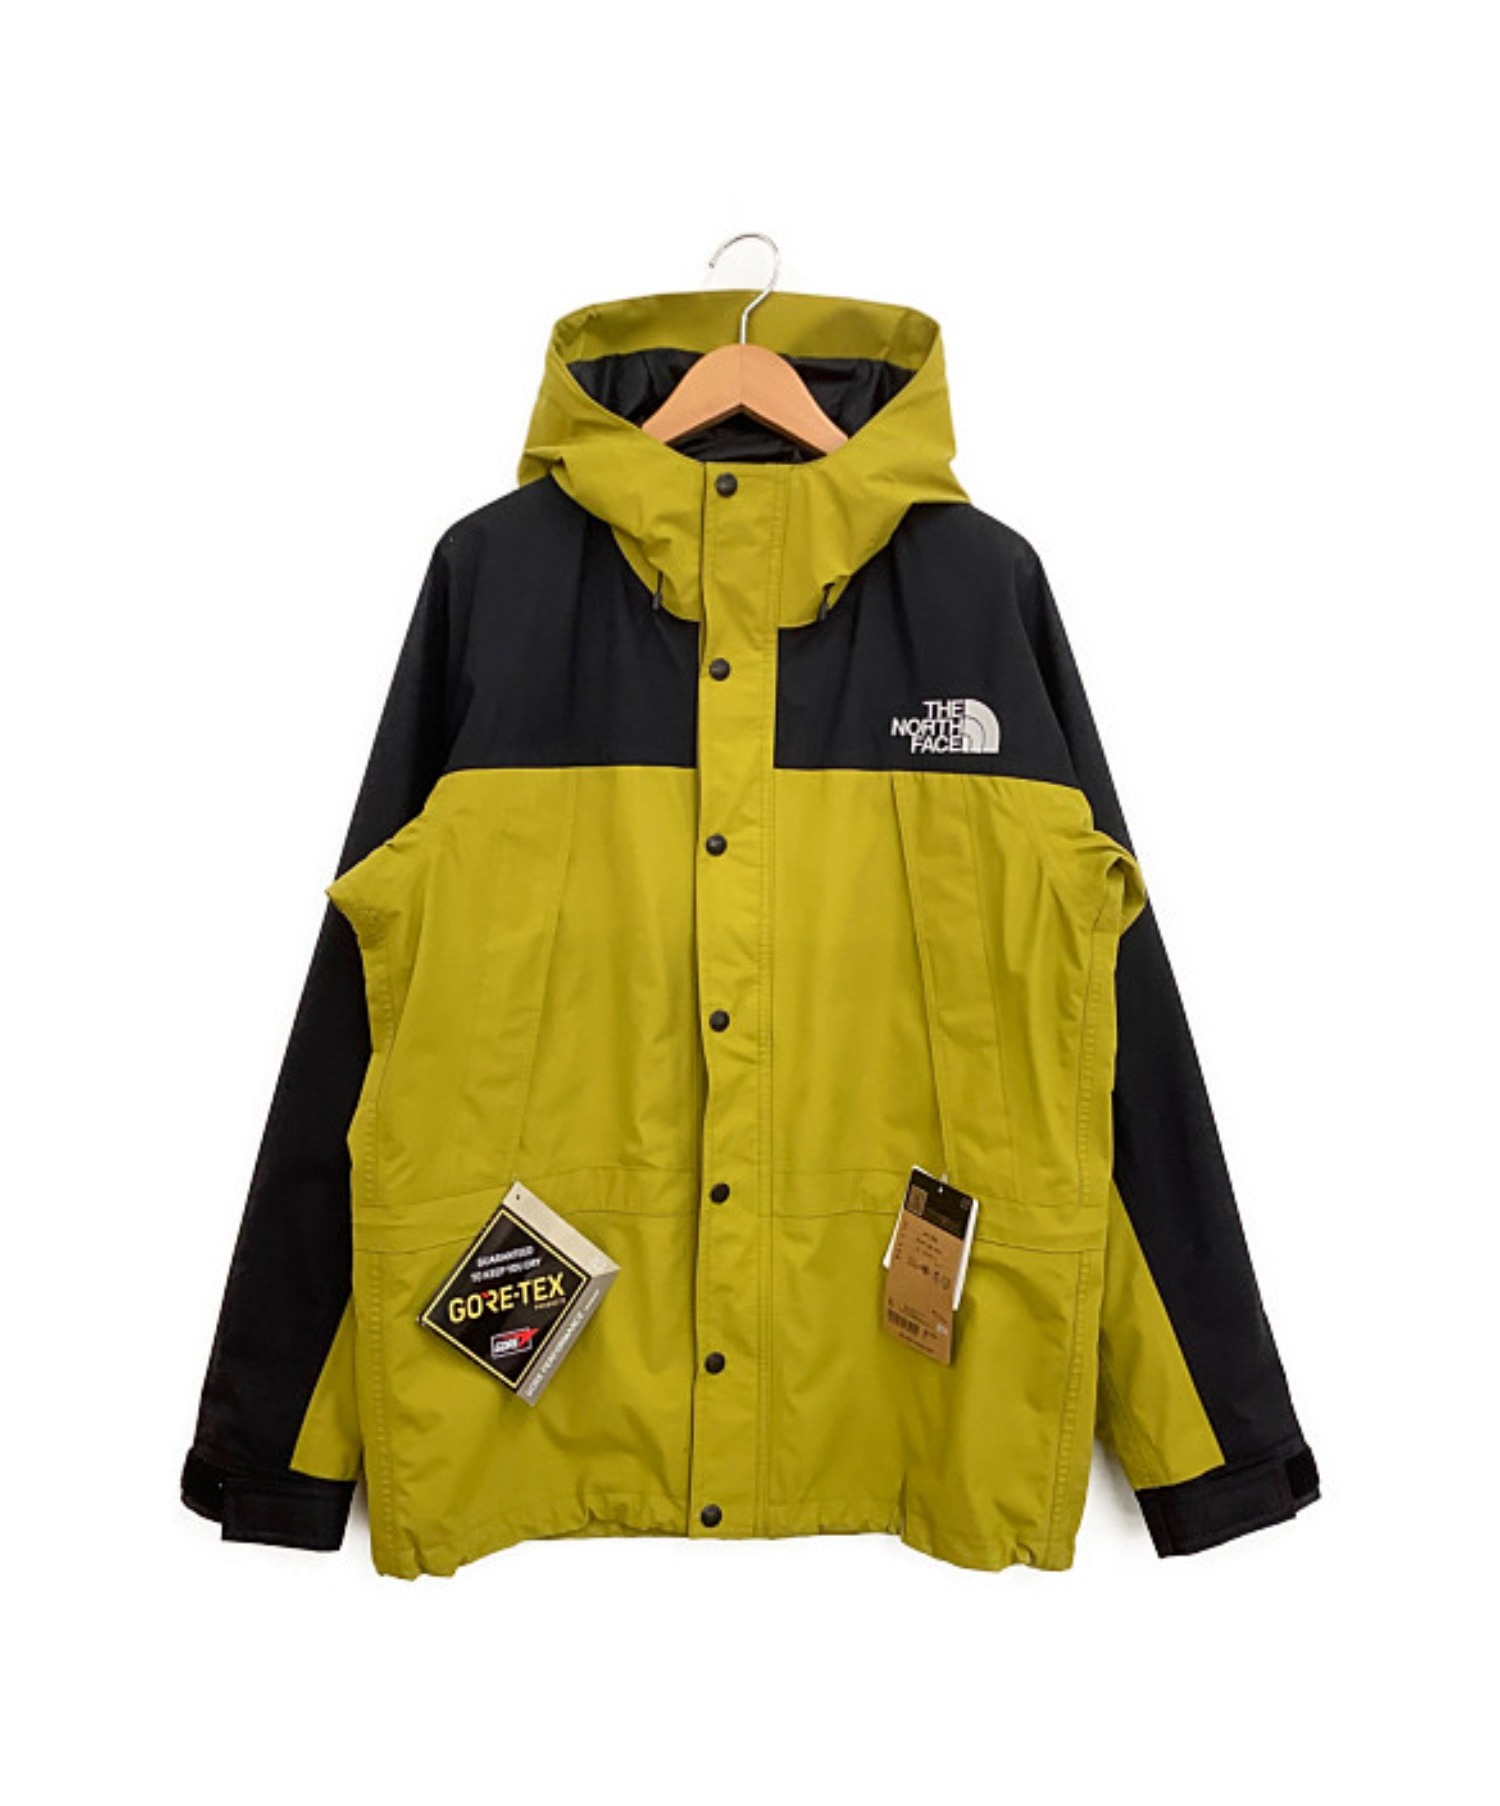 THE NORTH FACE MOUNTAIN LIGHT JACKET 黄色